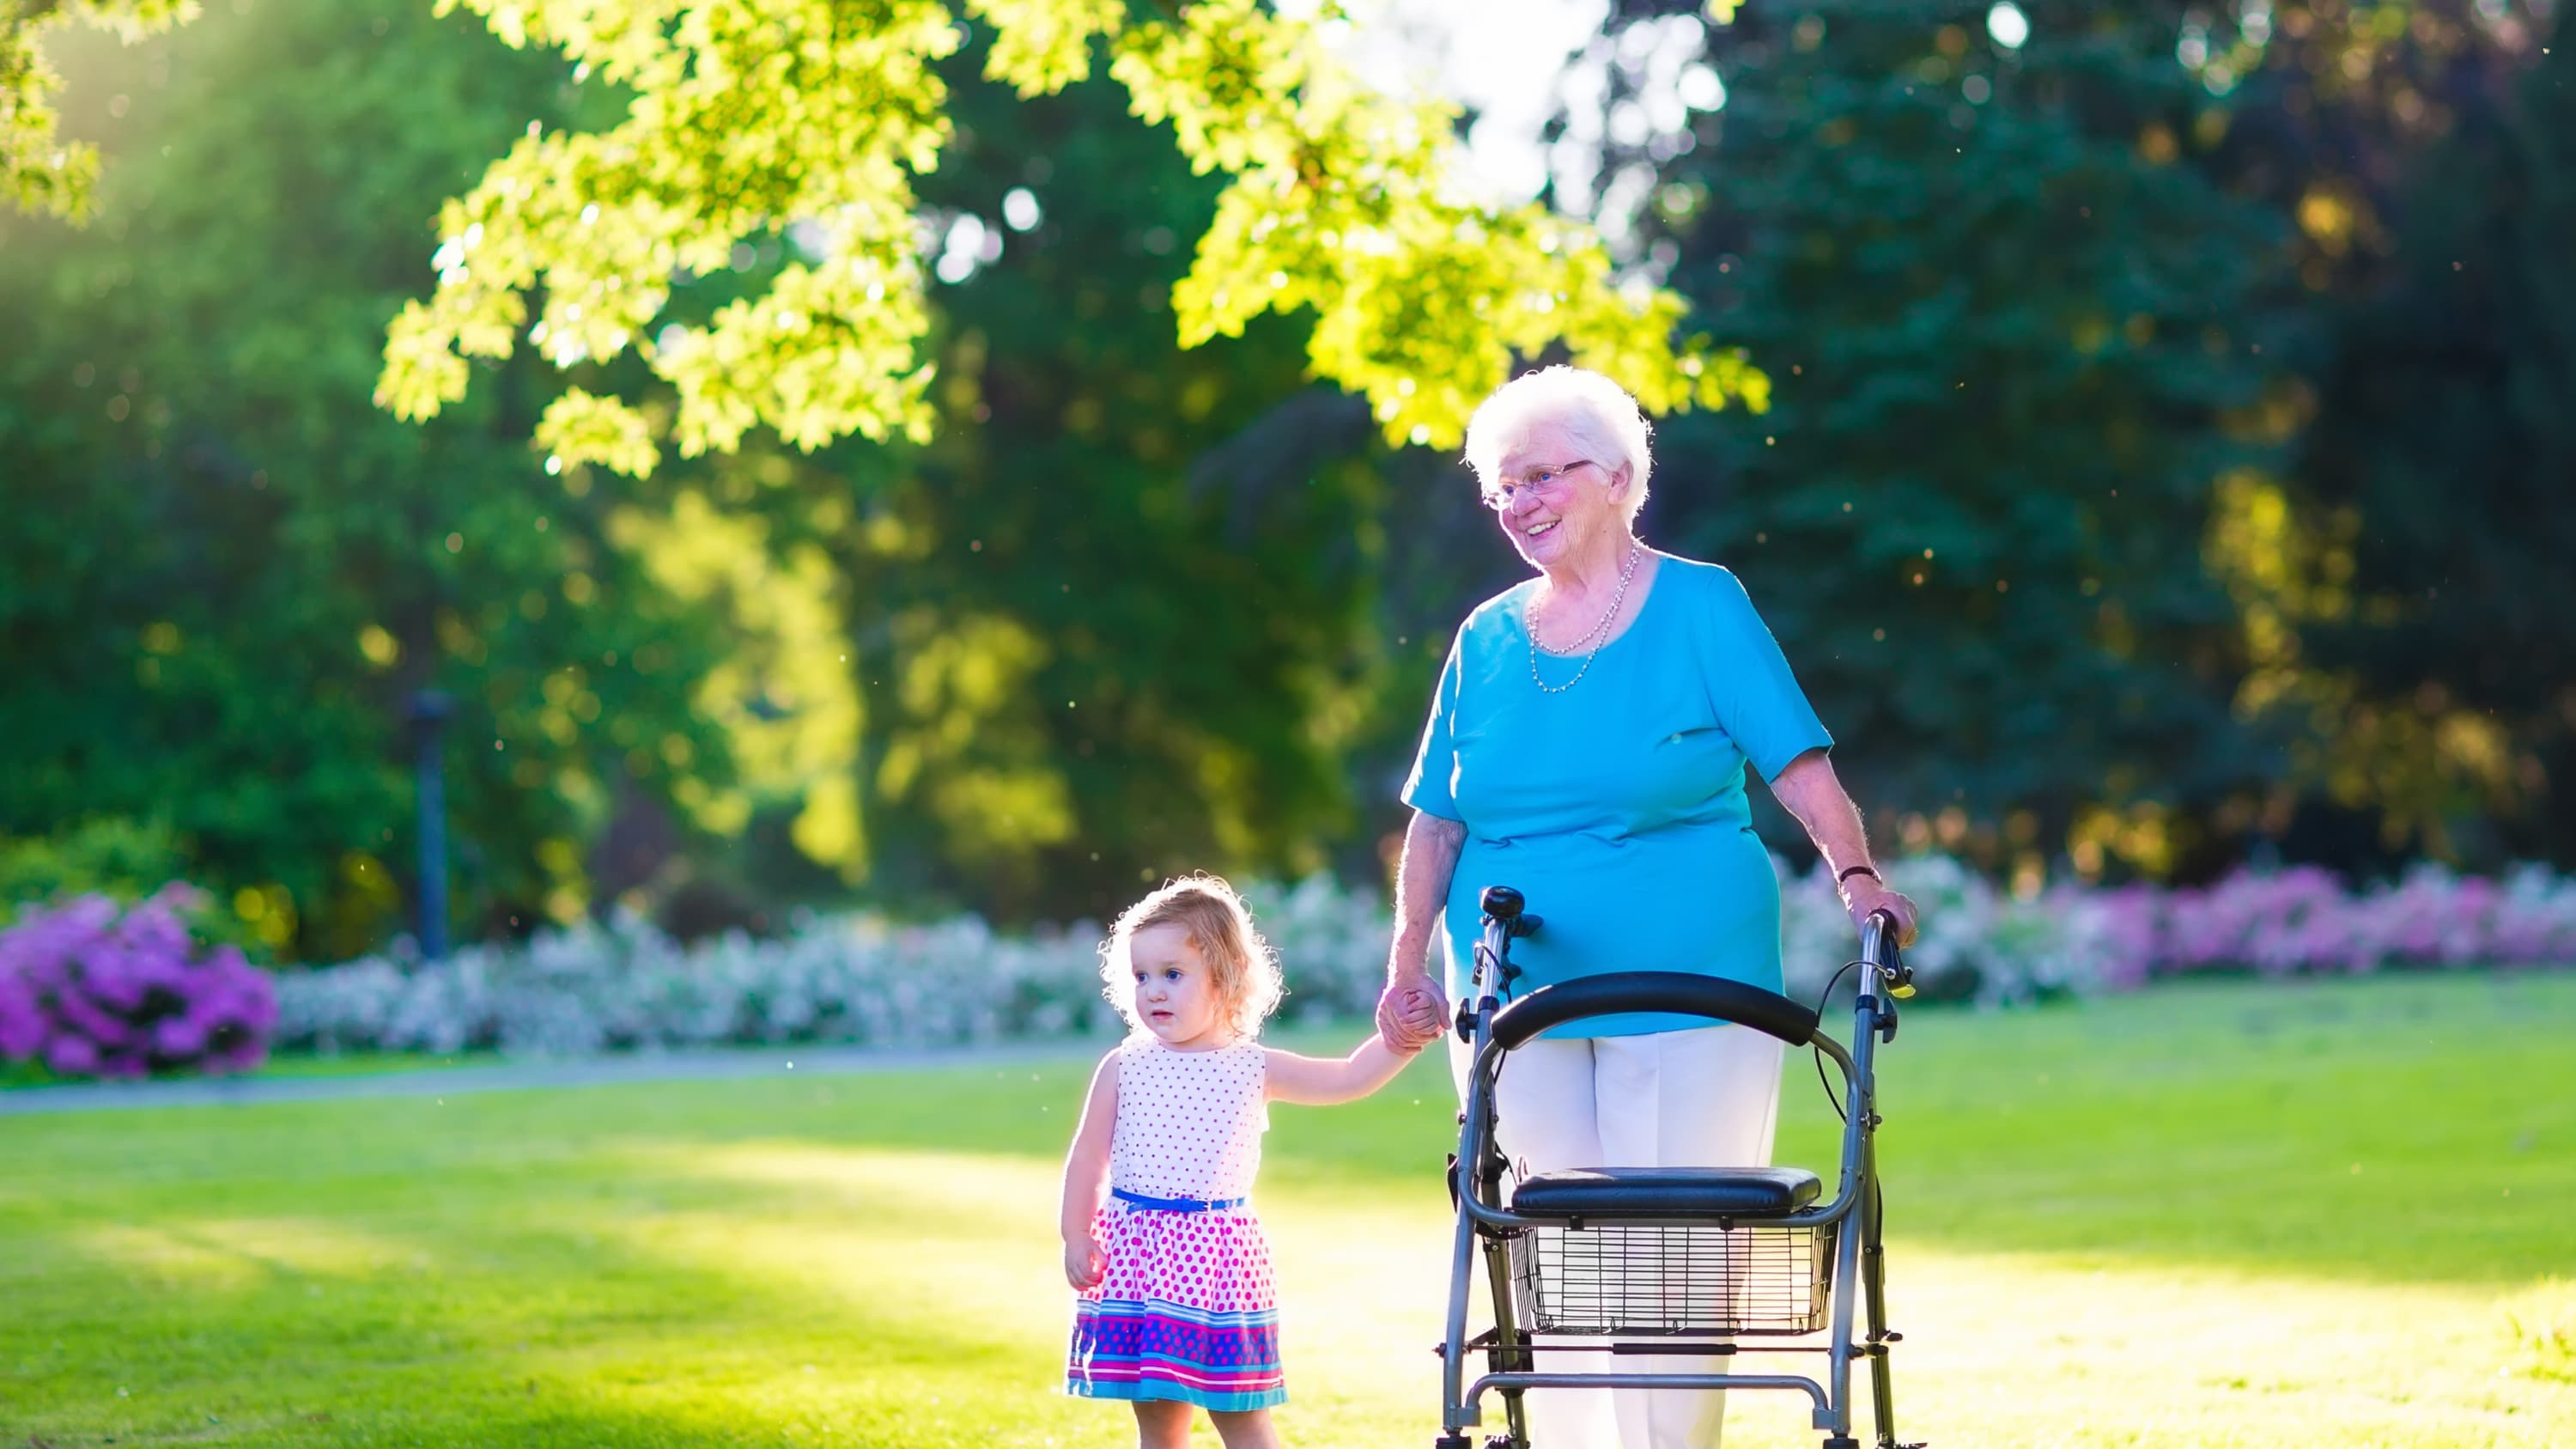 Happy senior lady with a walker or wheel chair and a little girl walk in a park, possibly after the woman had a hip fracture